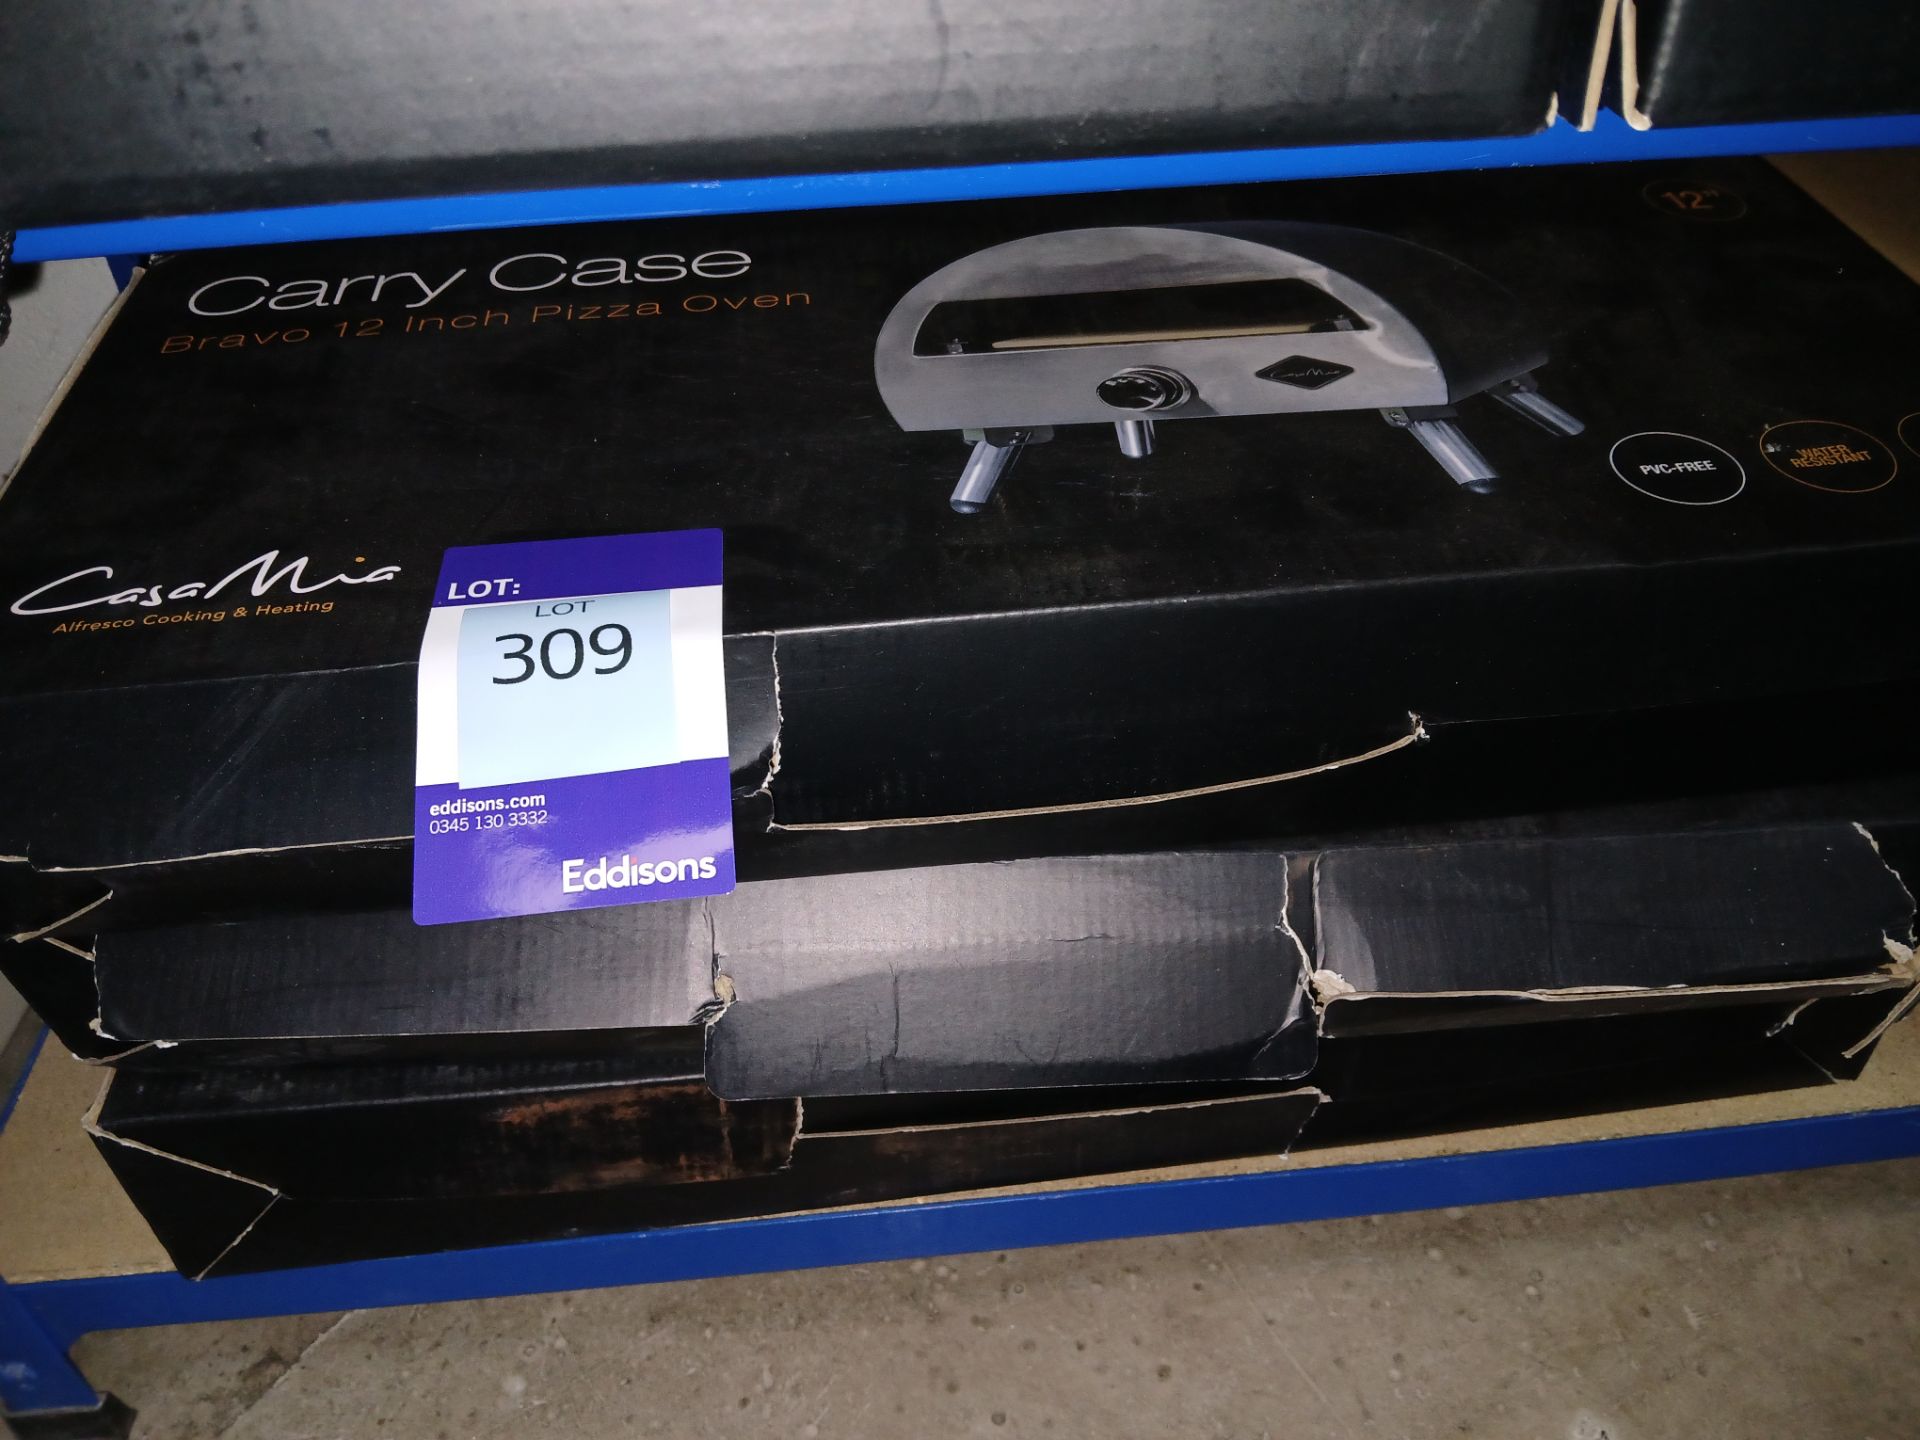 3 x Casa Mia Bravo 12" Pizza Oven Carry Case (Please note, Viewing Strongly Recommended - Eddisons